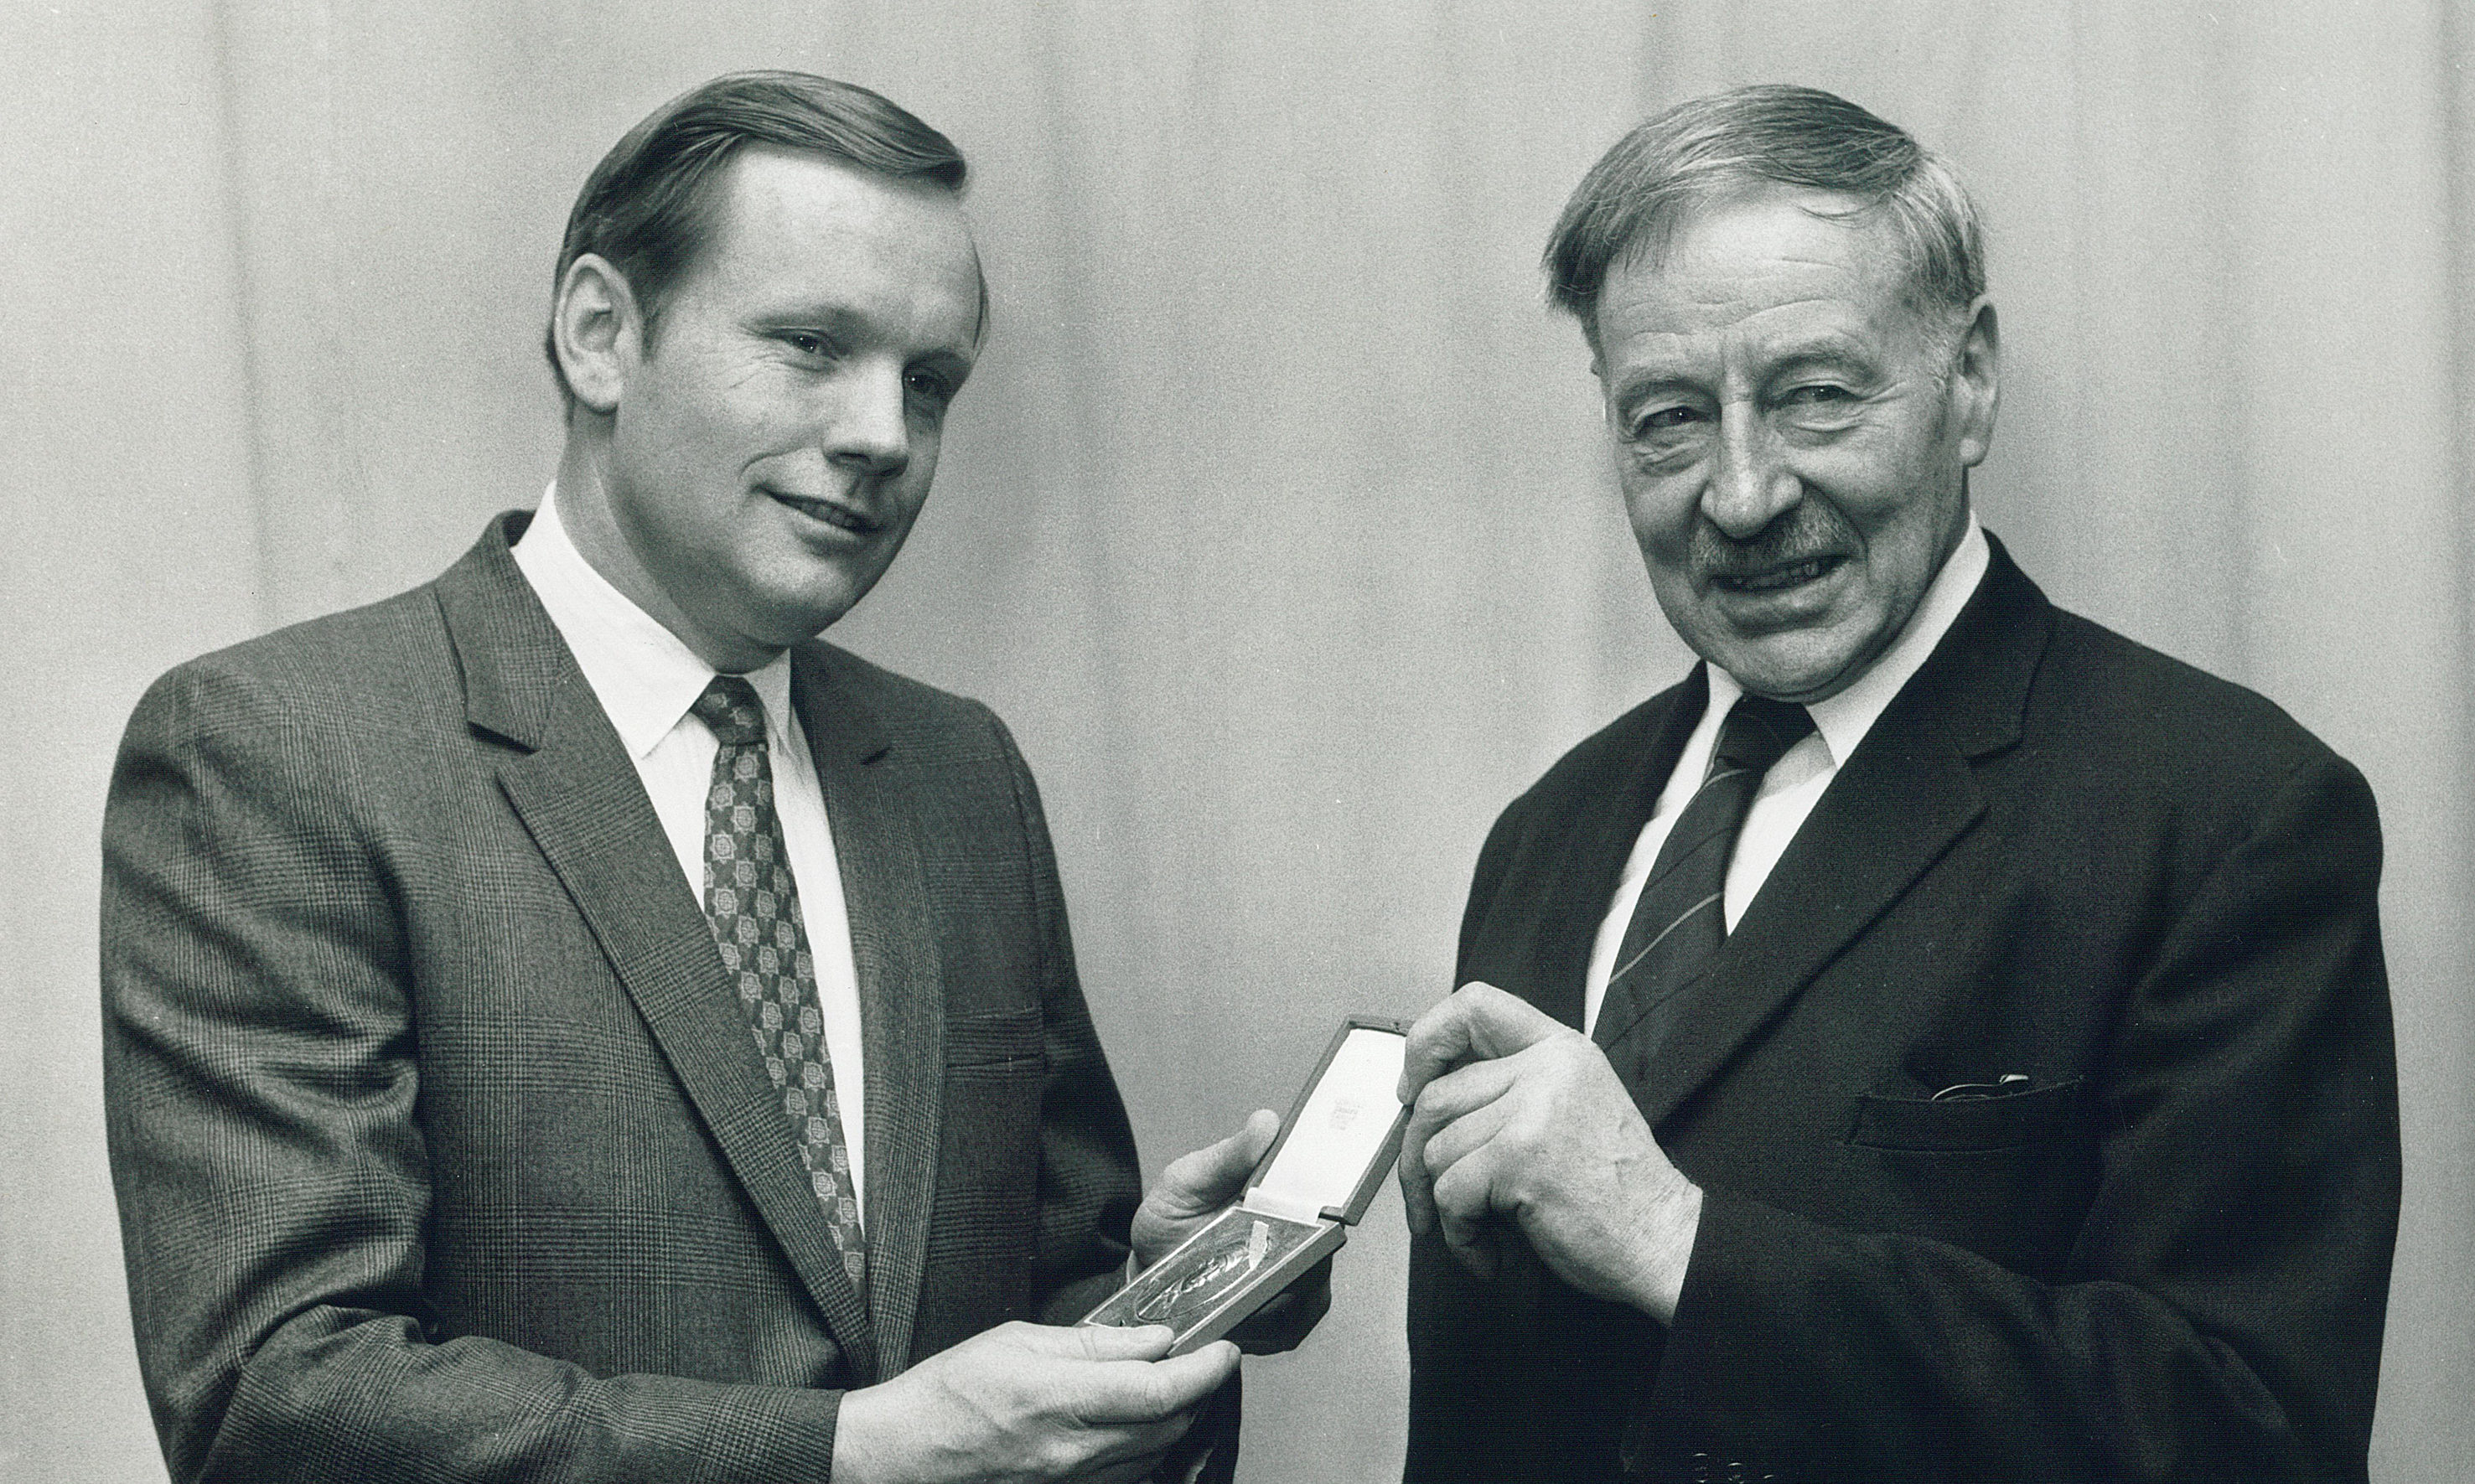 First man on the moon Neil Armstrong receives a Livingstone Medal from Lord Balerno of the Royal Scottish Geographical Society.